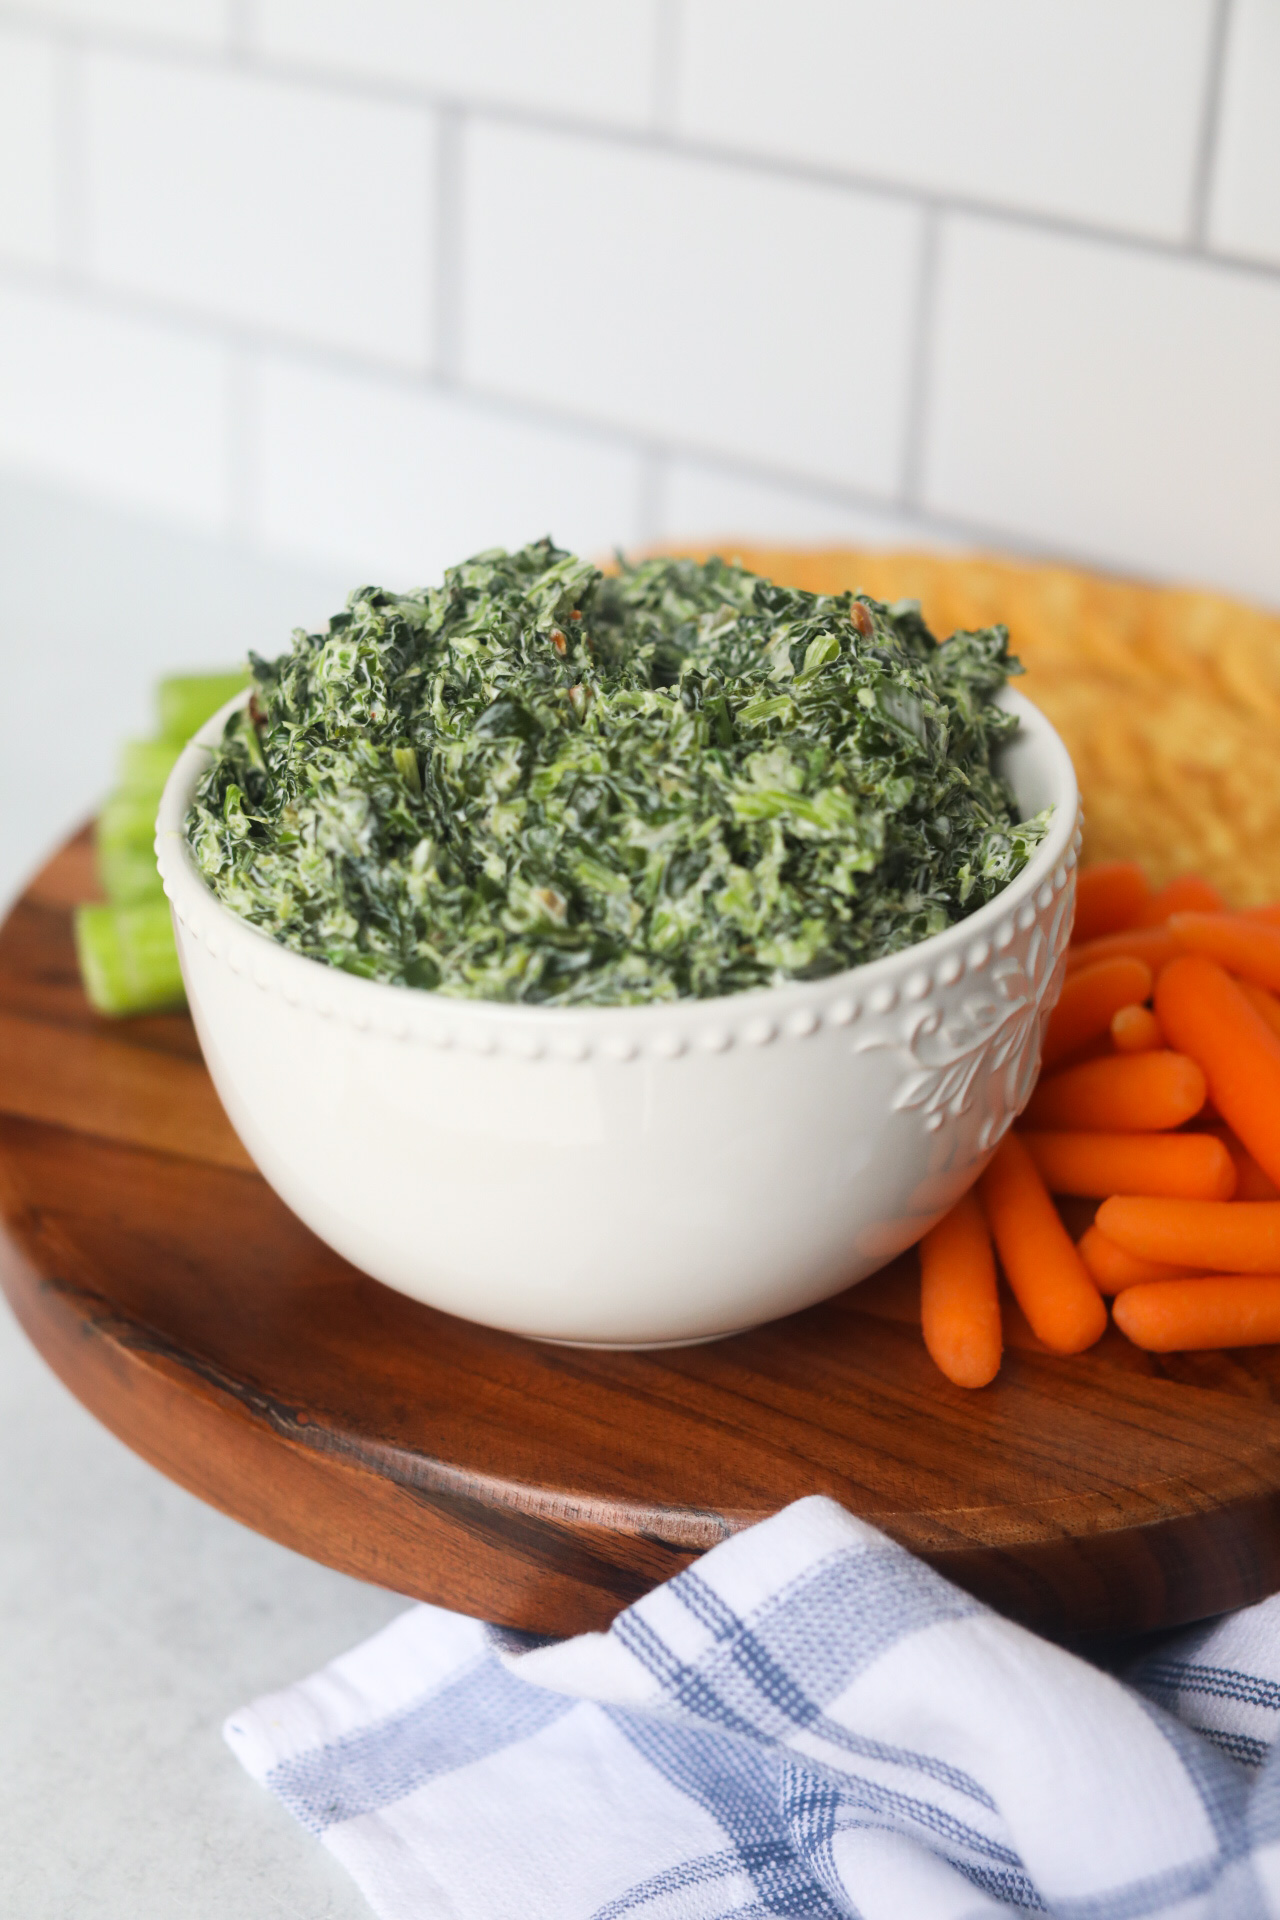 Complete and plated recipe served a white bowl on a brown wooden board. Surrounding the bowl of spinach dip with carrots, celery and crackers.